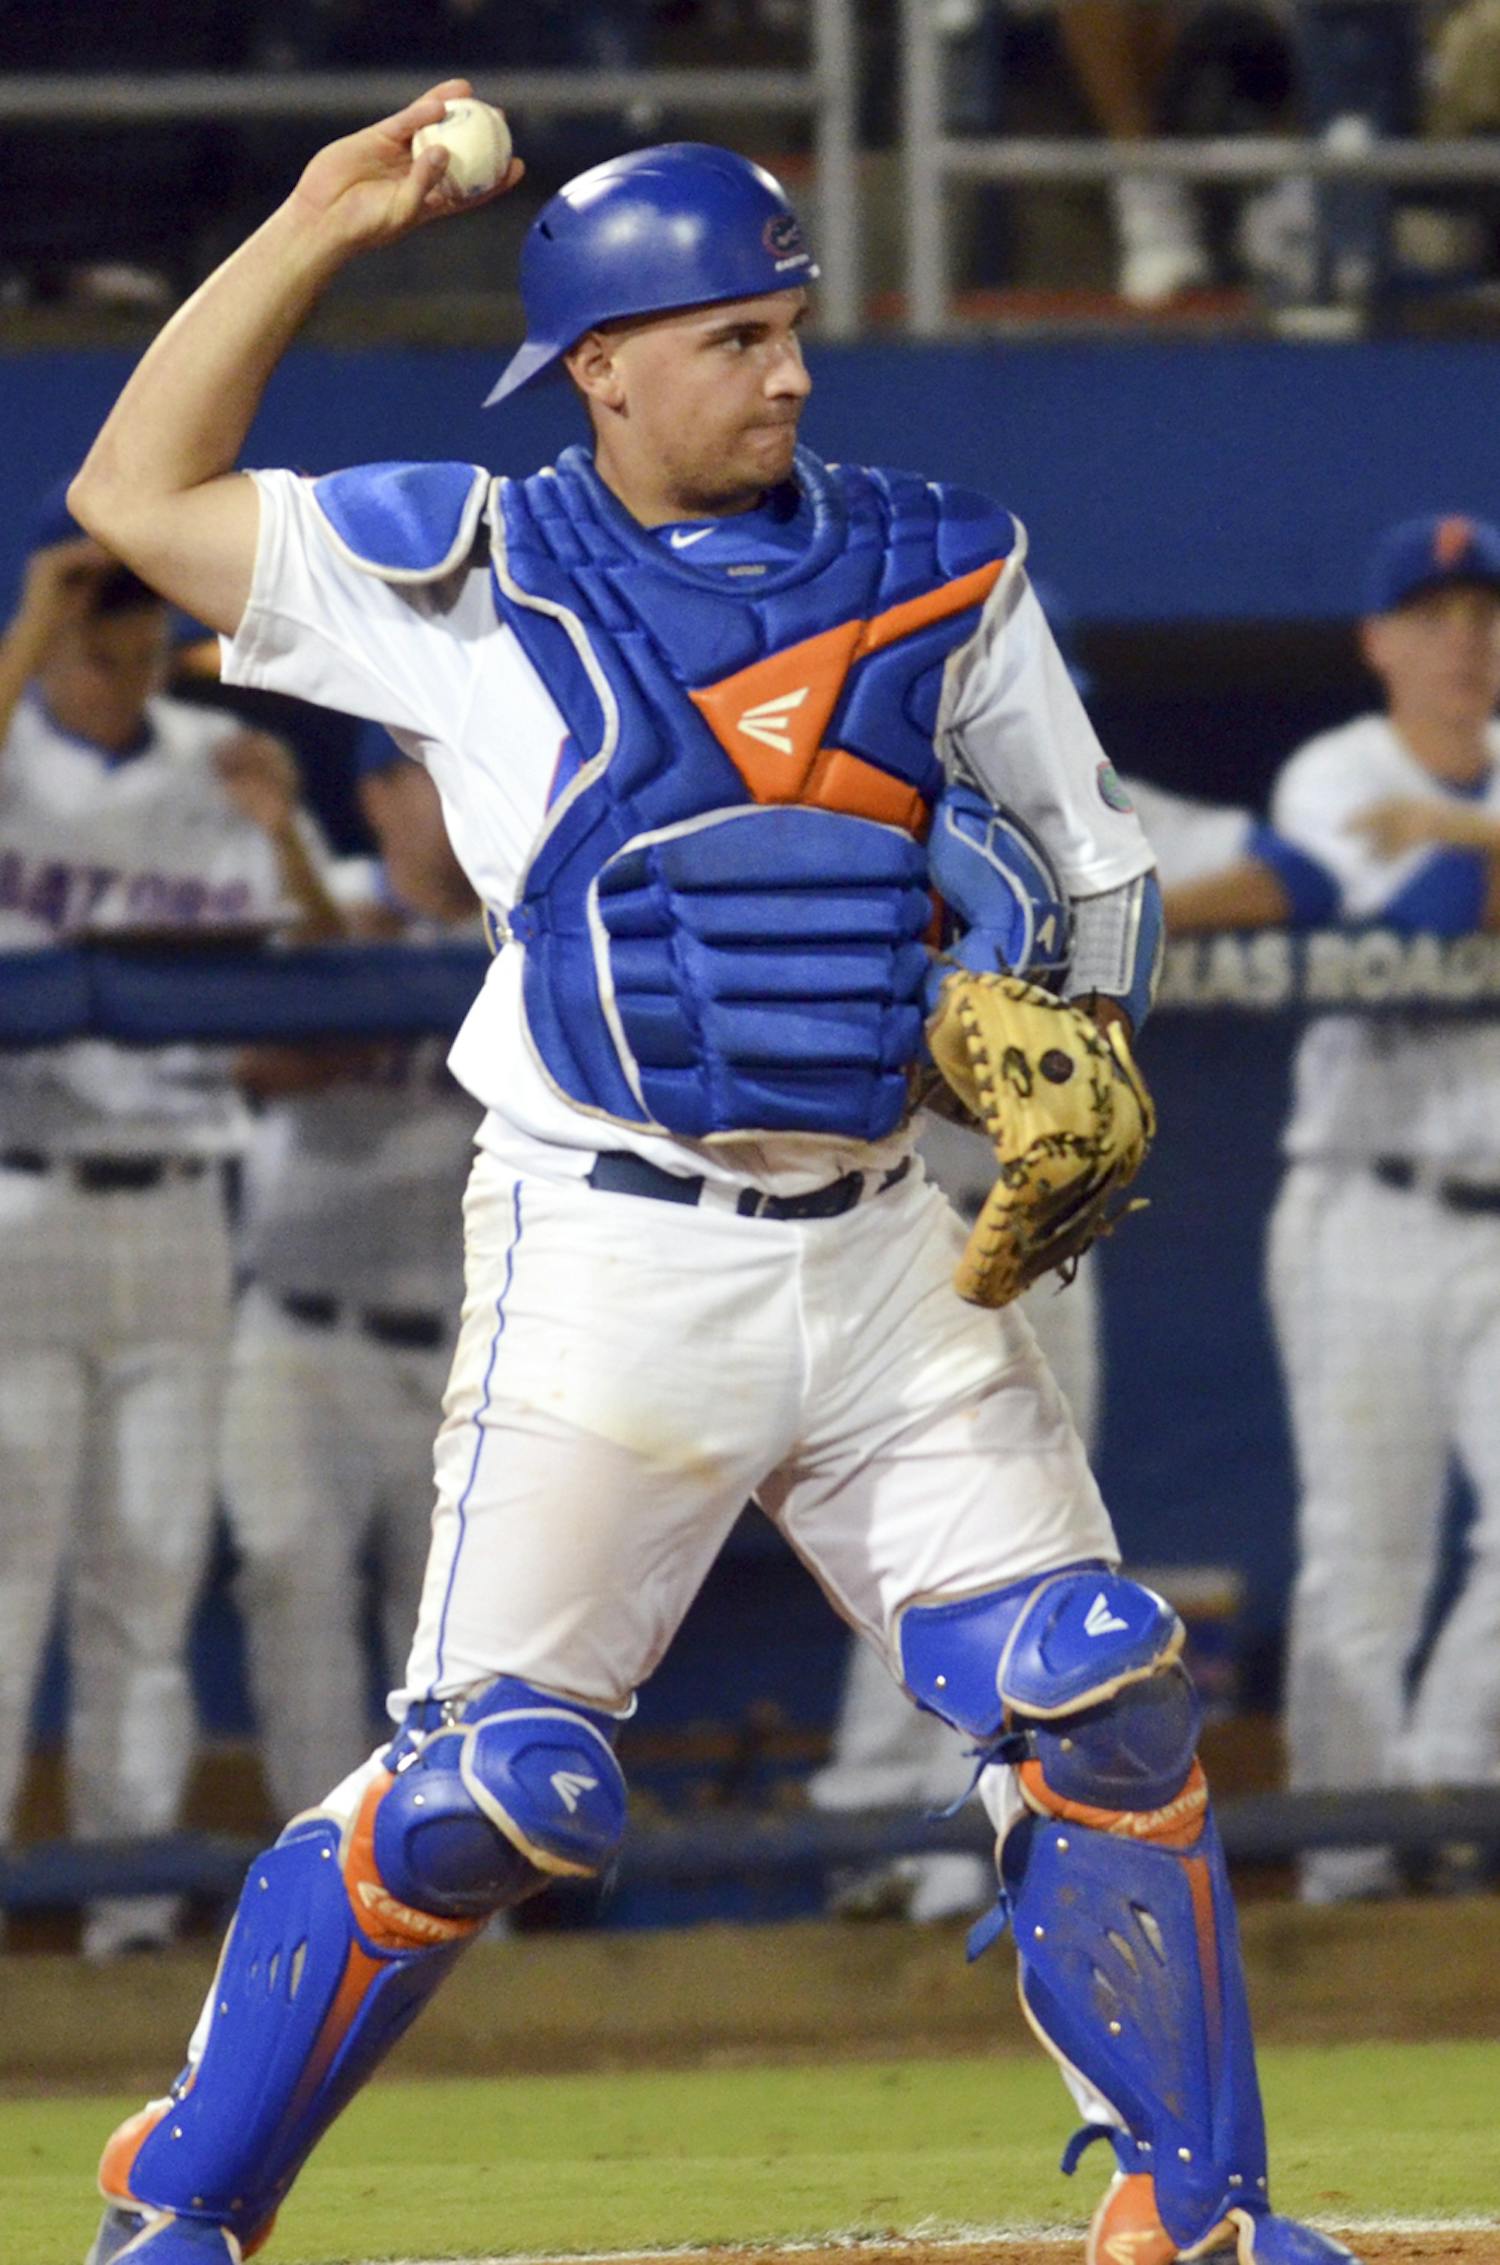 UF freshman catcher Mike Rivera throws the ball back to pitcher Logan Shore (not pictured) during Florida's 14-3 win against South Carolina on April 10, 2015 at McKethan Stadium.